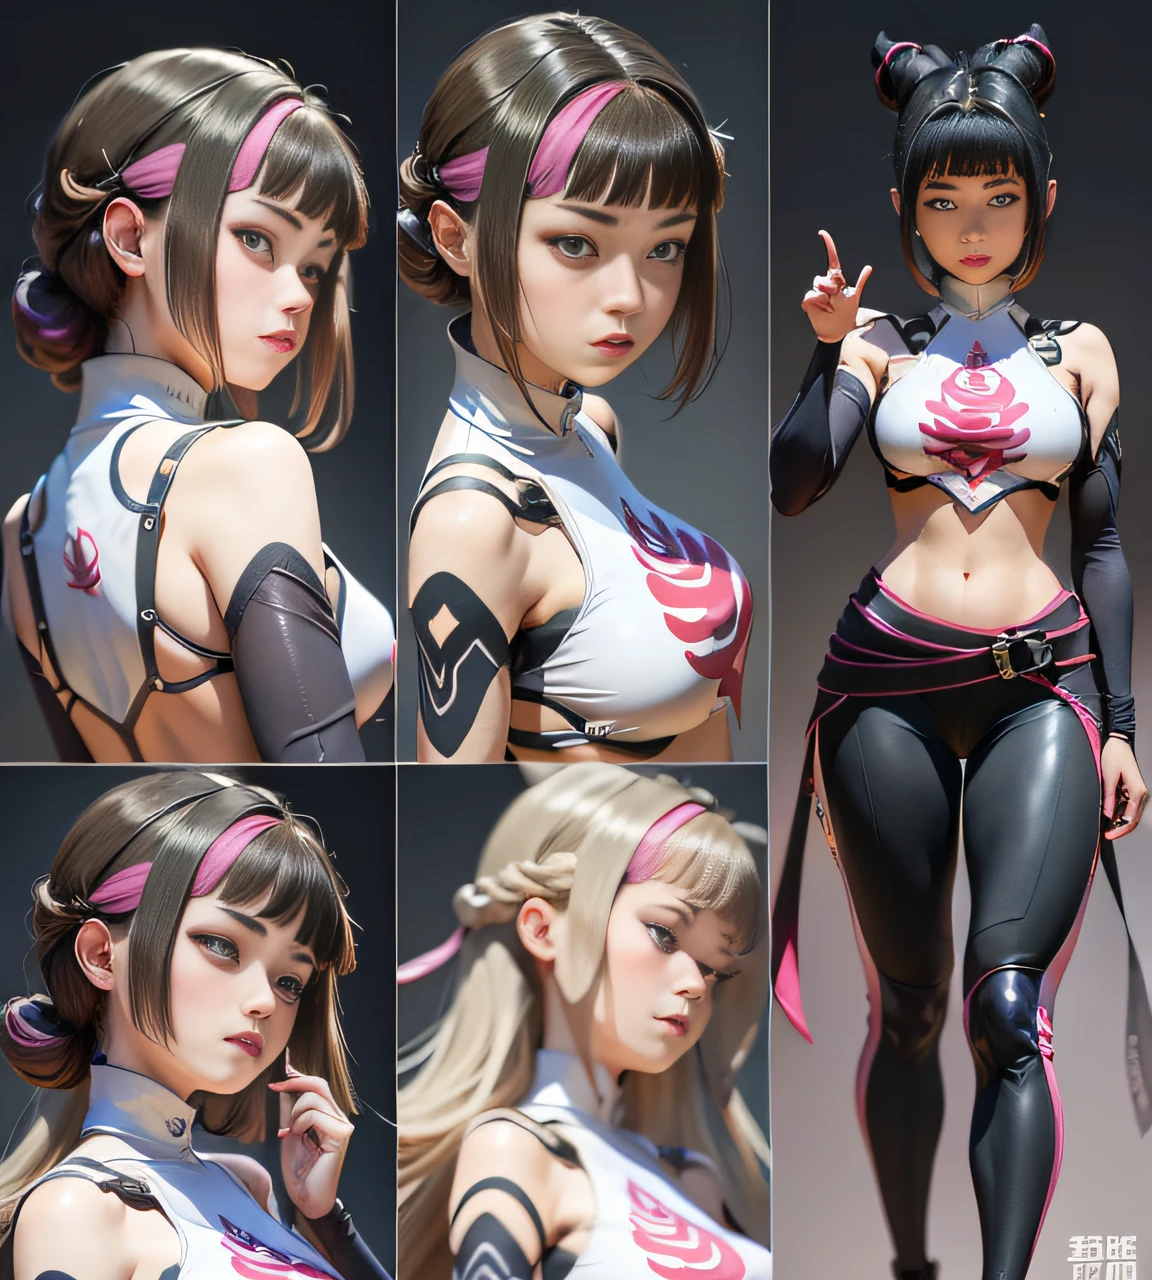 ((masterpiece)),(((best quality))),(character design sheet, same character, front, side, back), illustration, 1 girl, hair color, bangs, hairstyle fax, eyes, environment change scene, hairstyle fax, Zitai pose, woman, Shangyi shirt, star, Charturnbetalora, (single background, white background: 1.3), --6 different poses, kawai